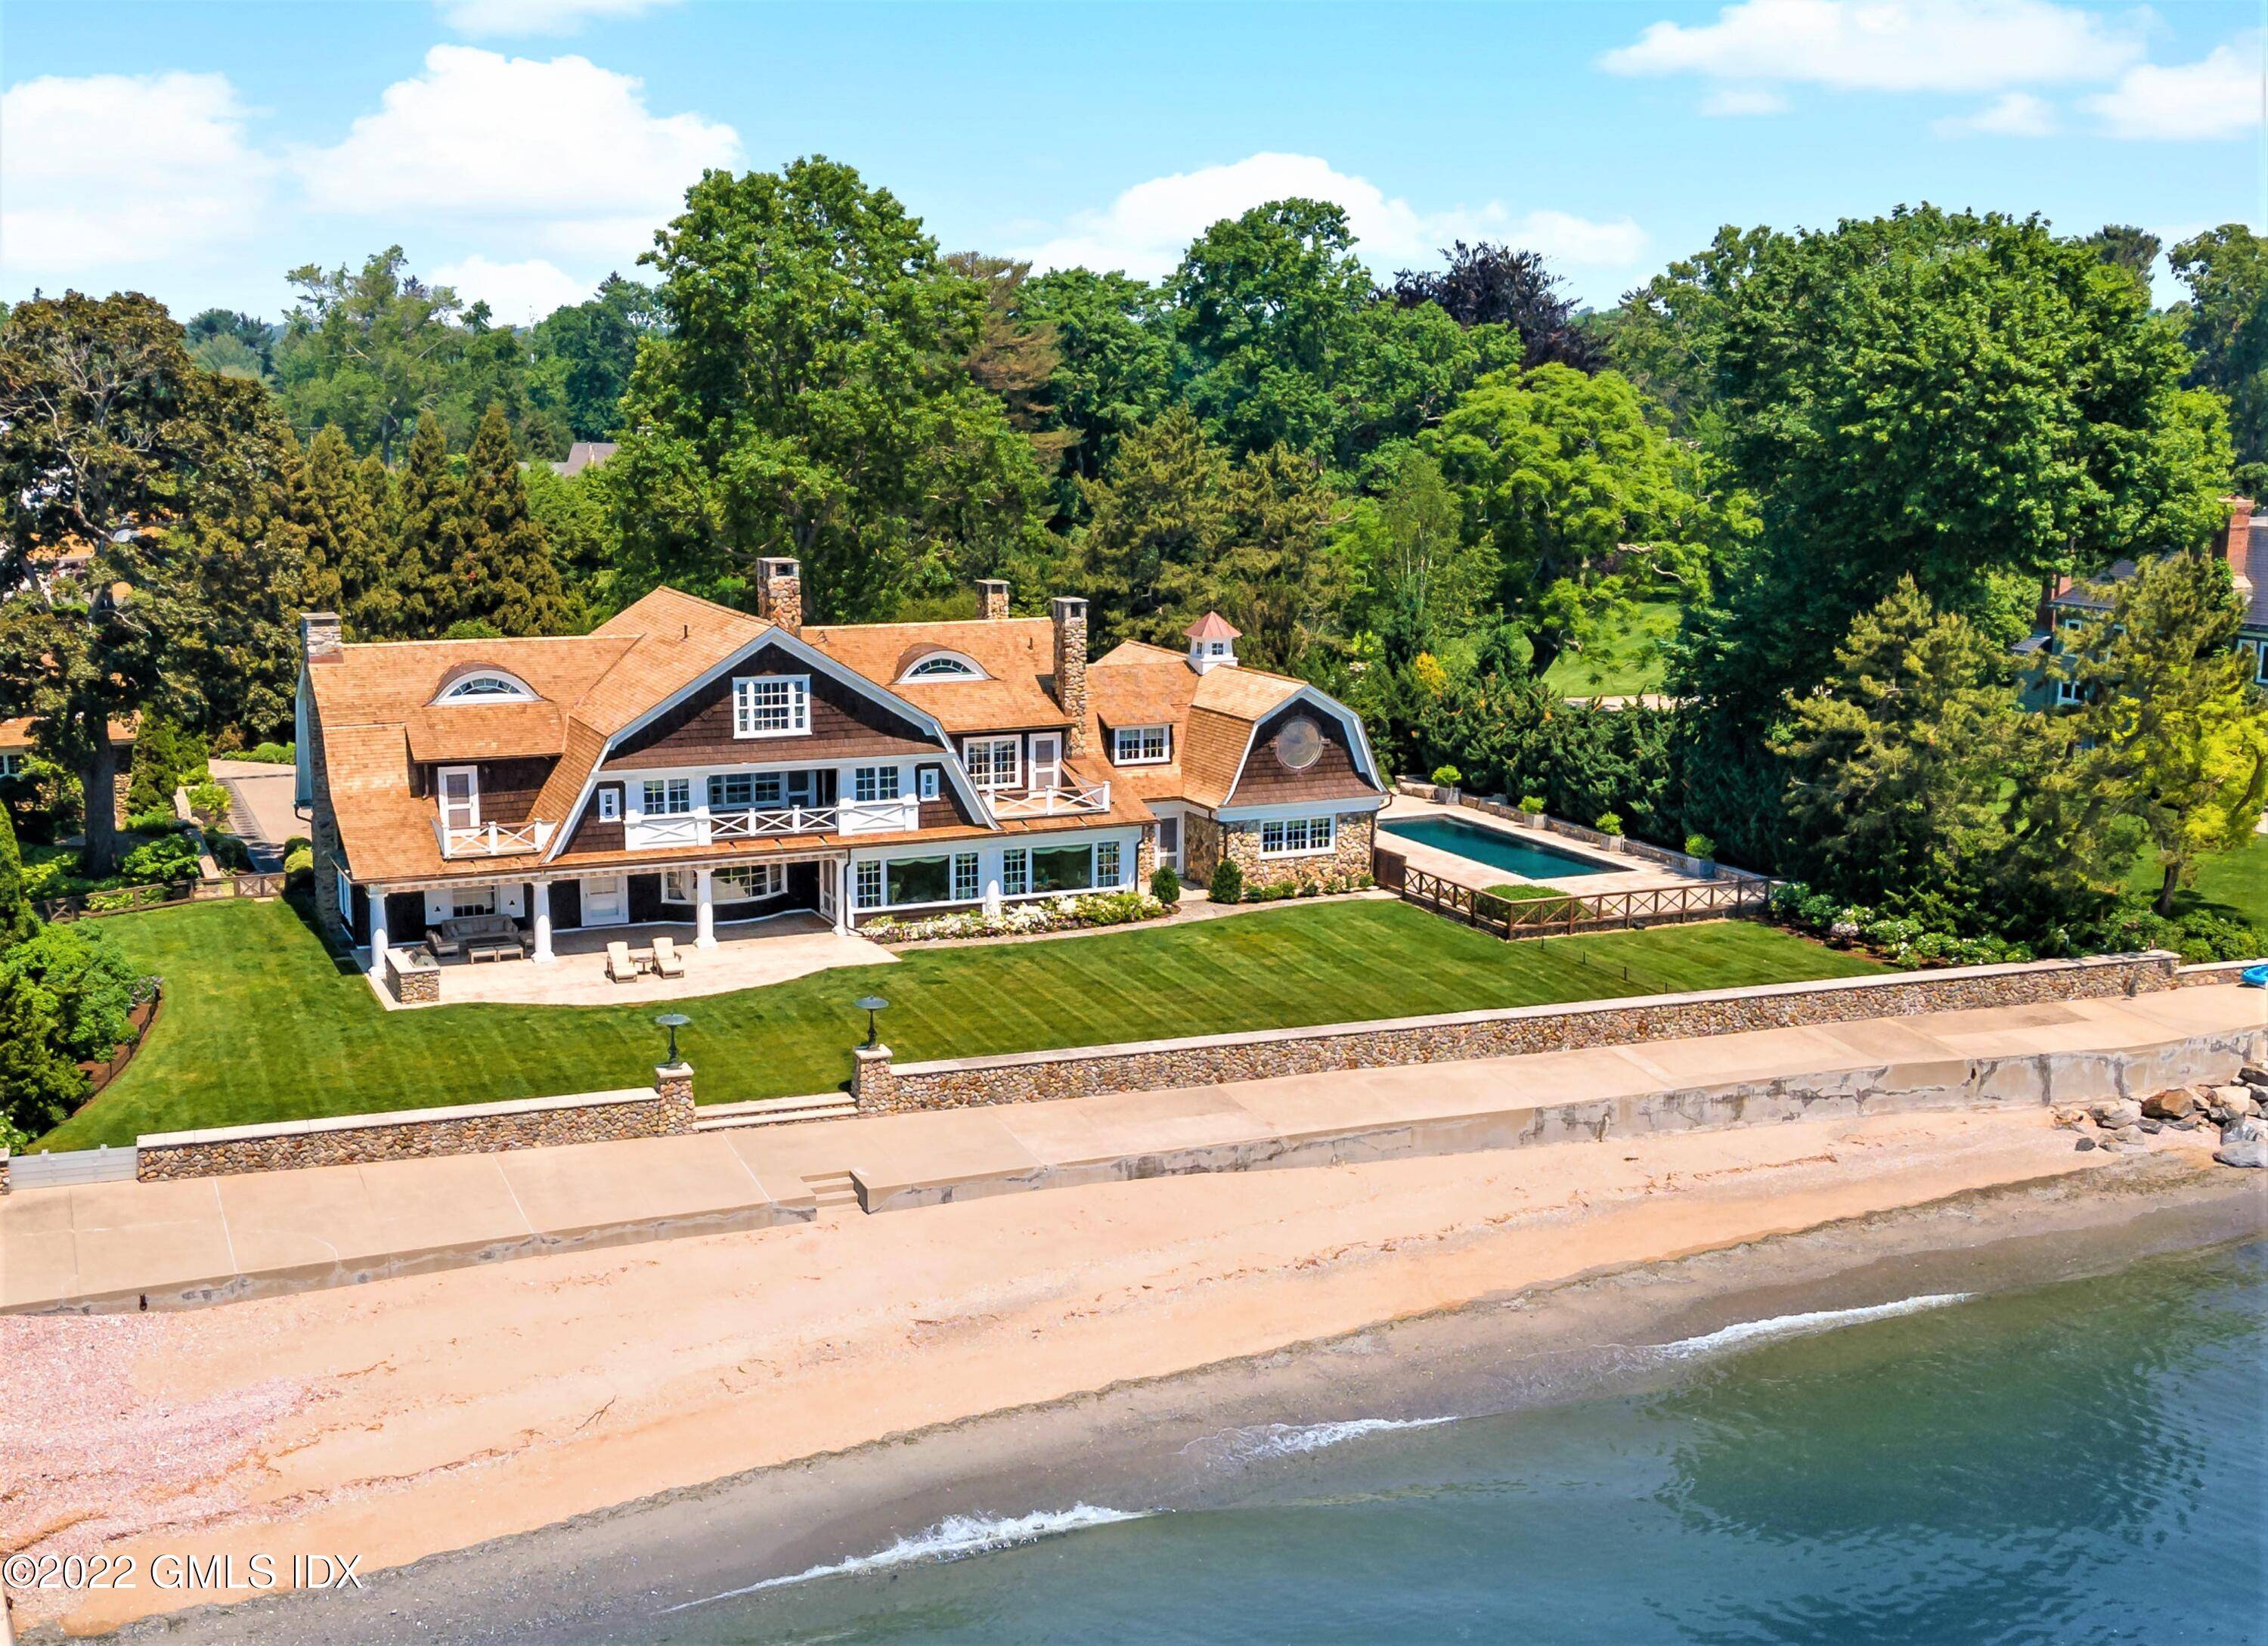 Southport With a sensational location directly on LI Sound, this spectacular 1.